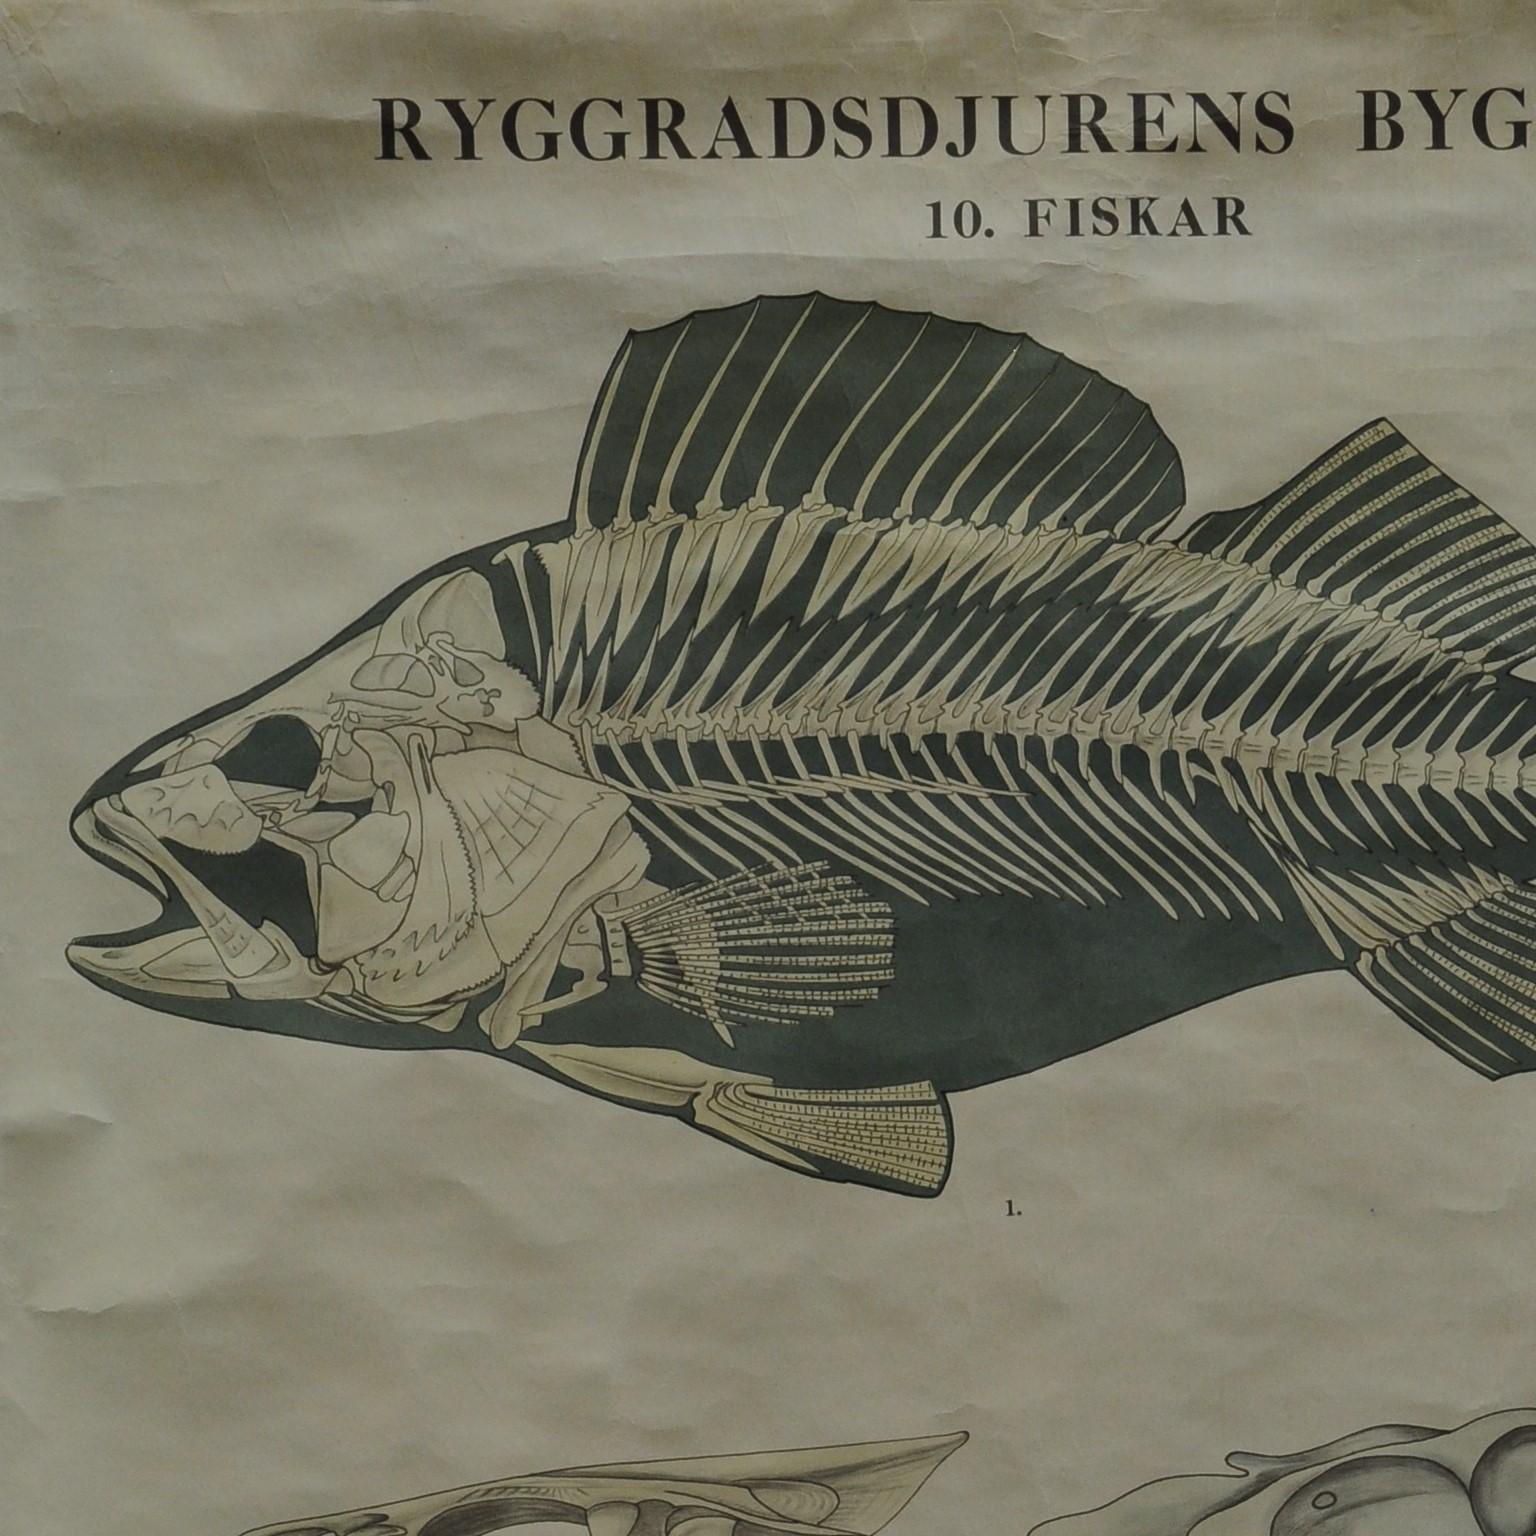 The pull-down Swedish wall chart illustrates the bone structure of a fish. Black and white print on paper reinforced with canvas. Published by Ryggradsjurens Byggnad 10. fiskar.
Measurements:
Width 70cm (27.56 inch)
Heigth 99 cm (38.98 inch)

The